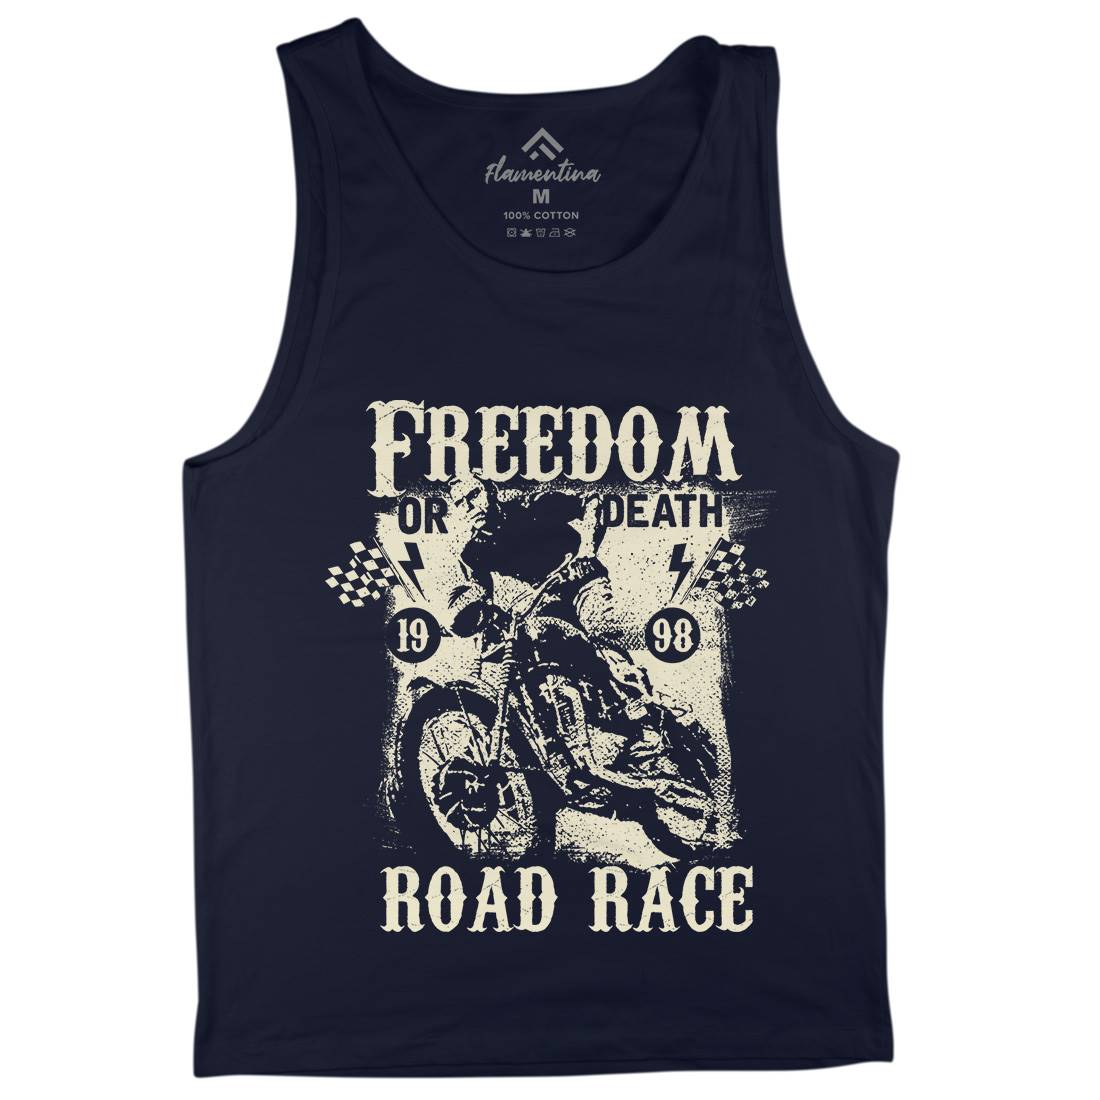 Freedom Or Death Mens Tank Top Vest Motorcycles C934